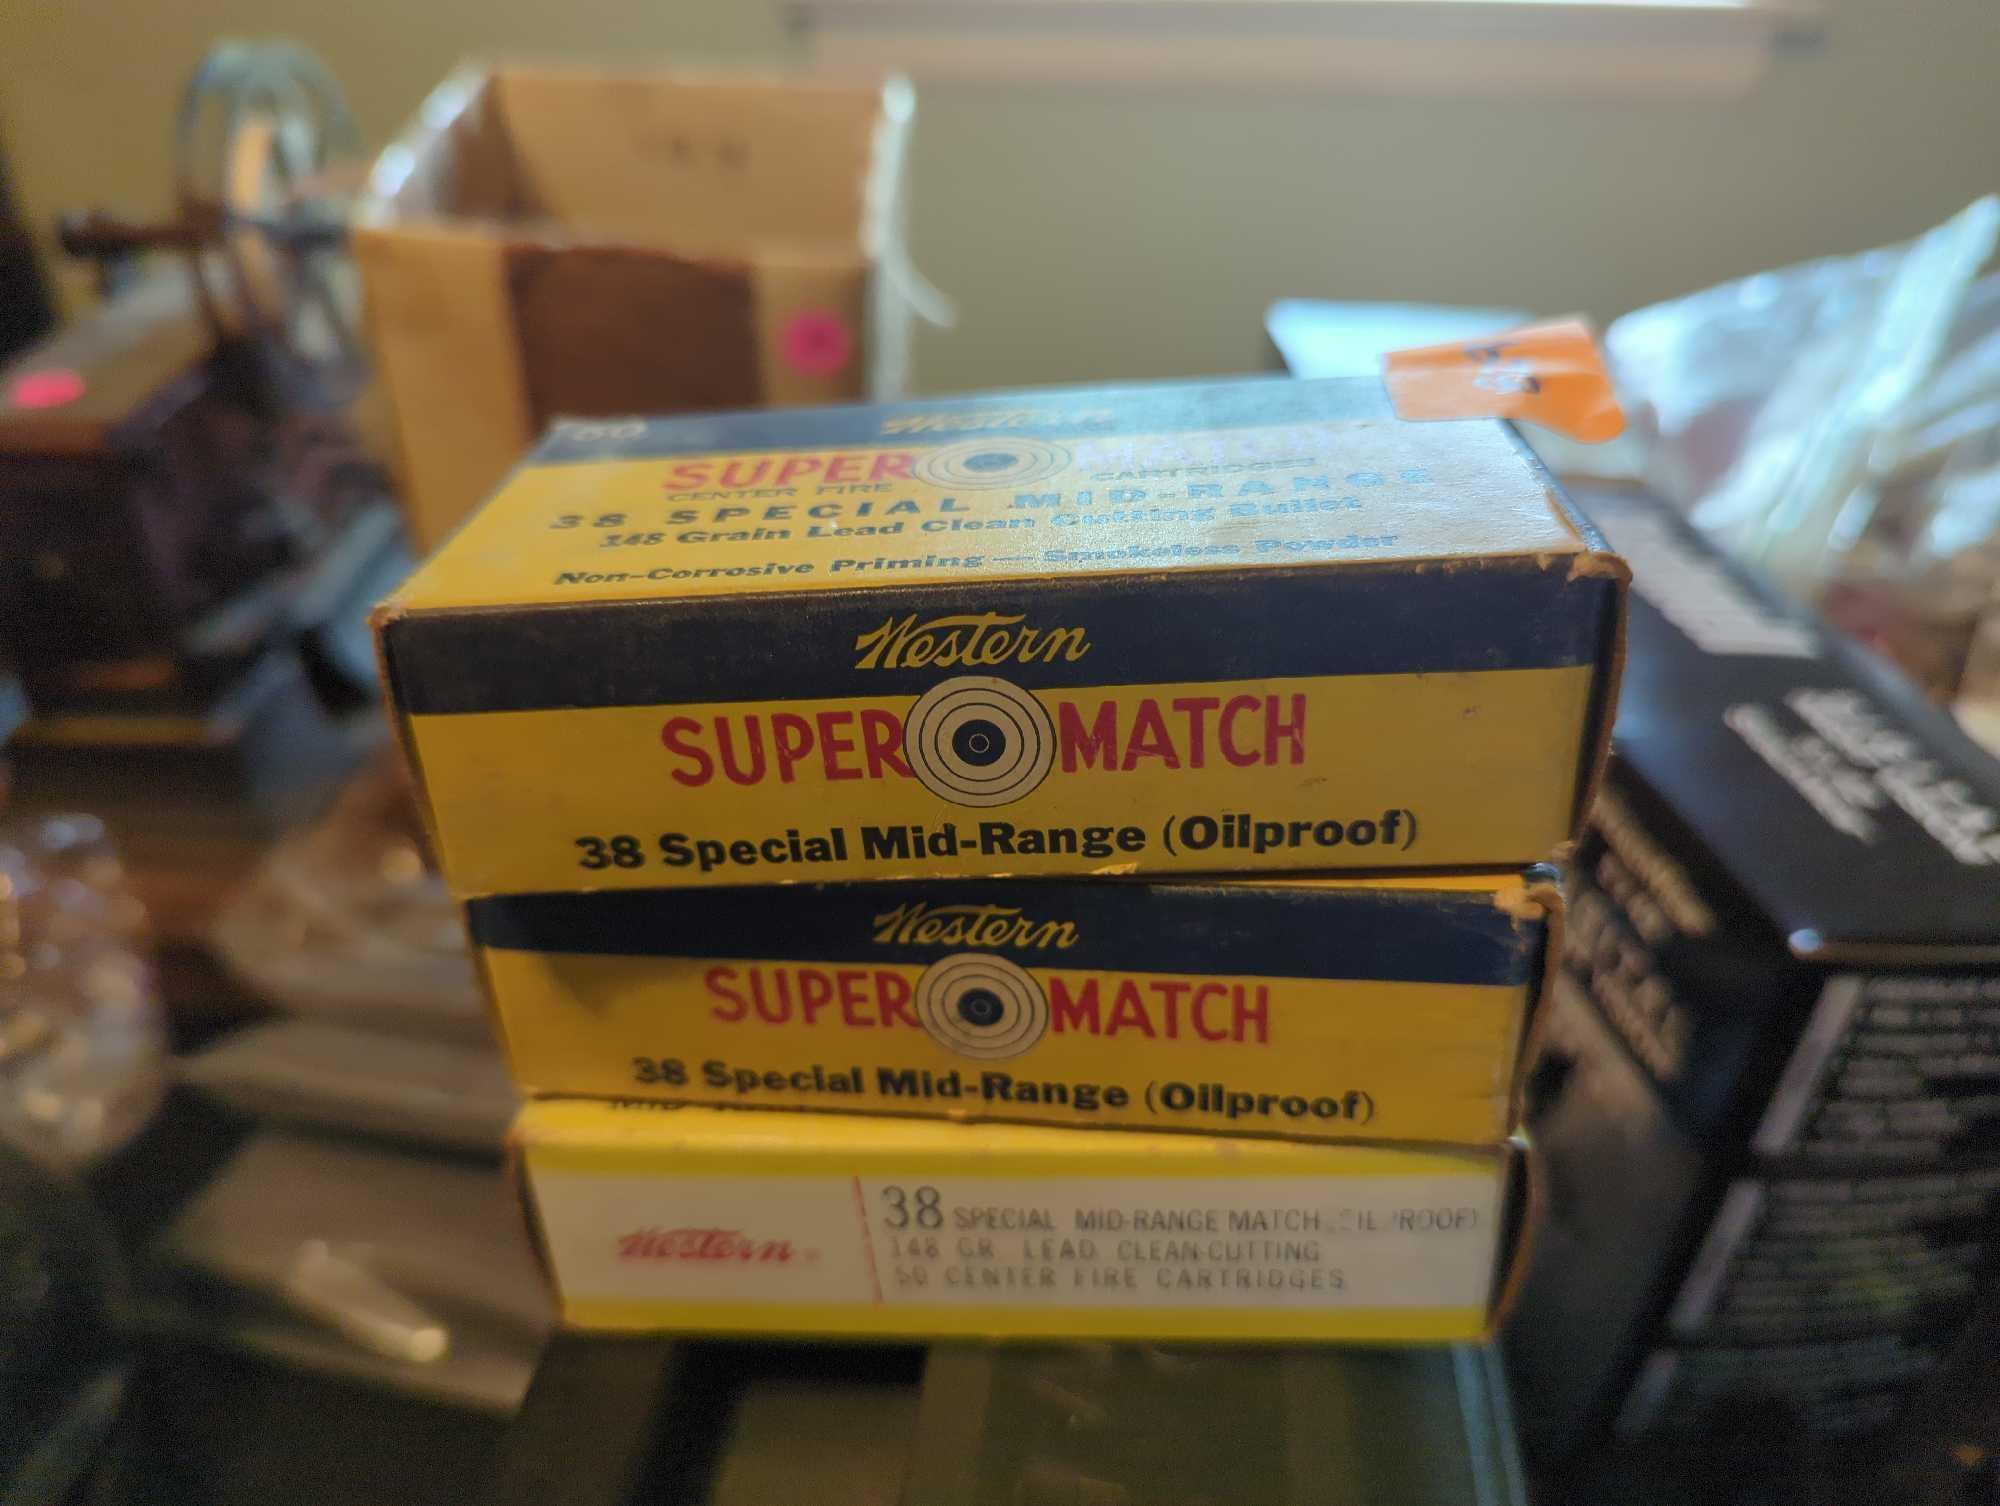 (BR3) LOT OF ASSORTED AMMUNITION INCLUDING THE BUNKER 500 ROUNDS (125 GRAIN), SUPER MATCH 38 SPECIAL